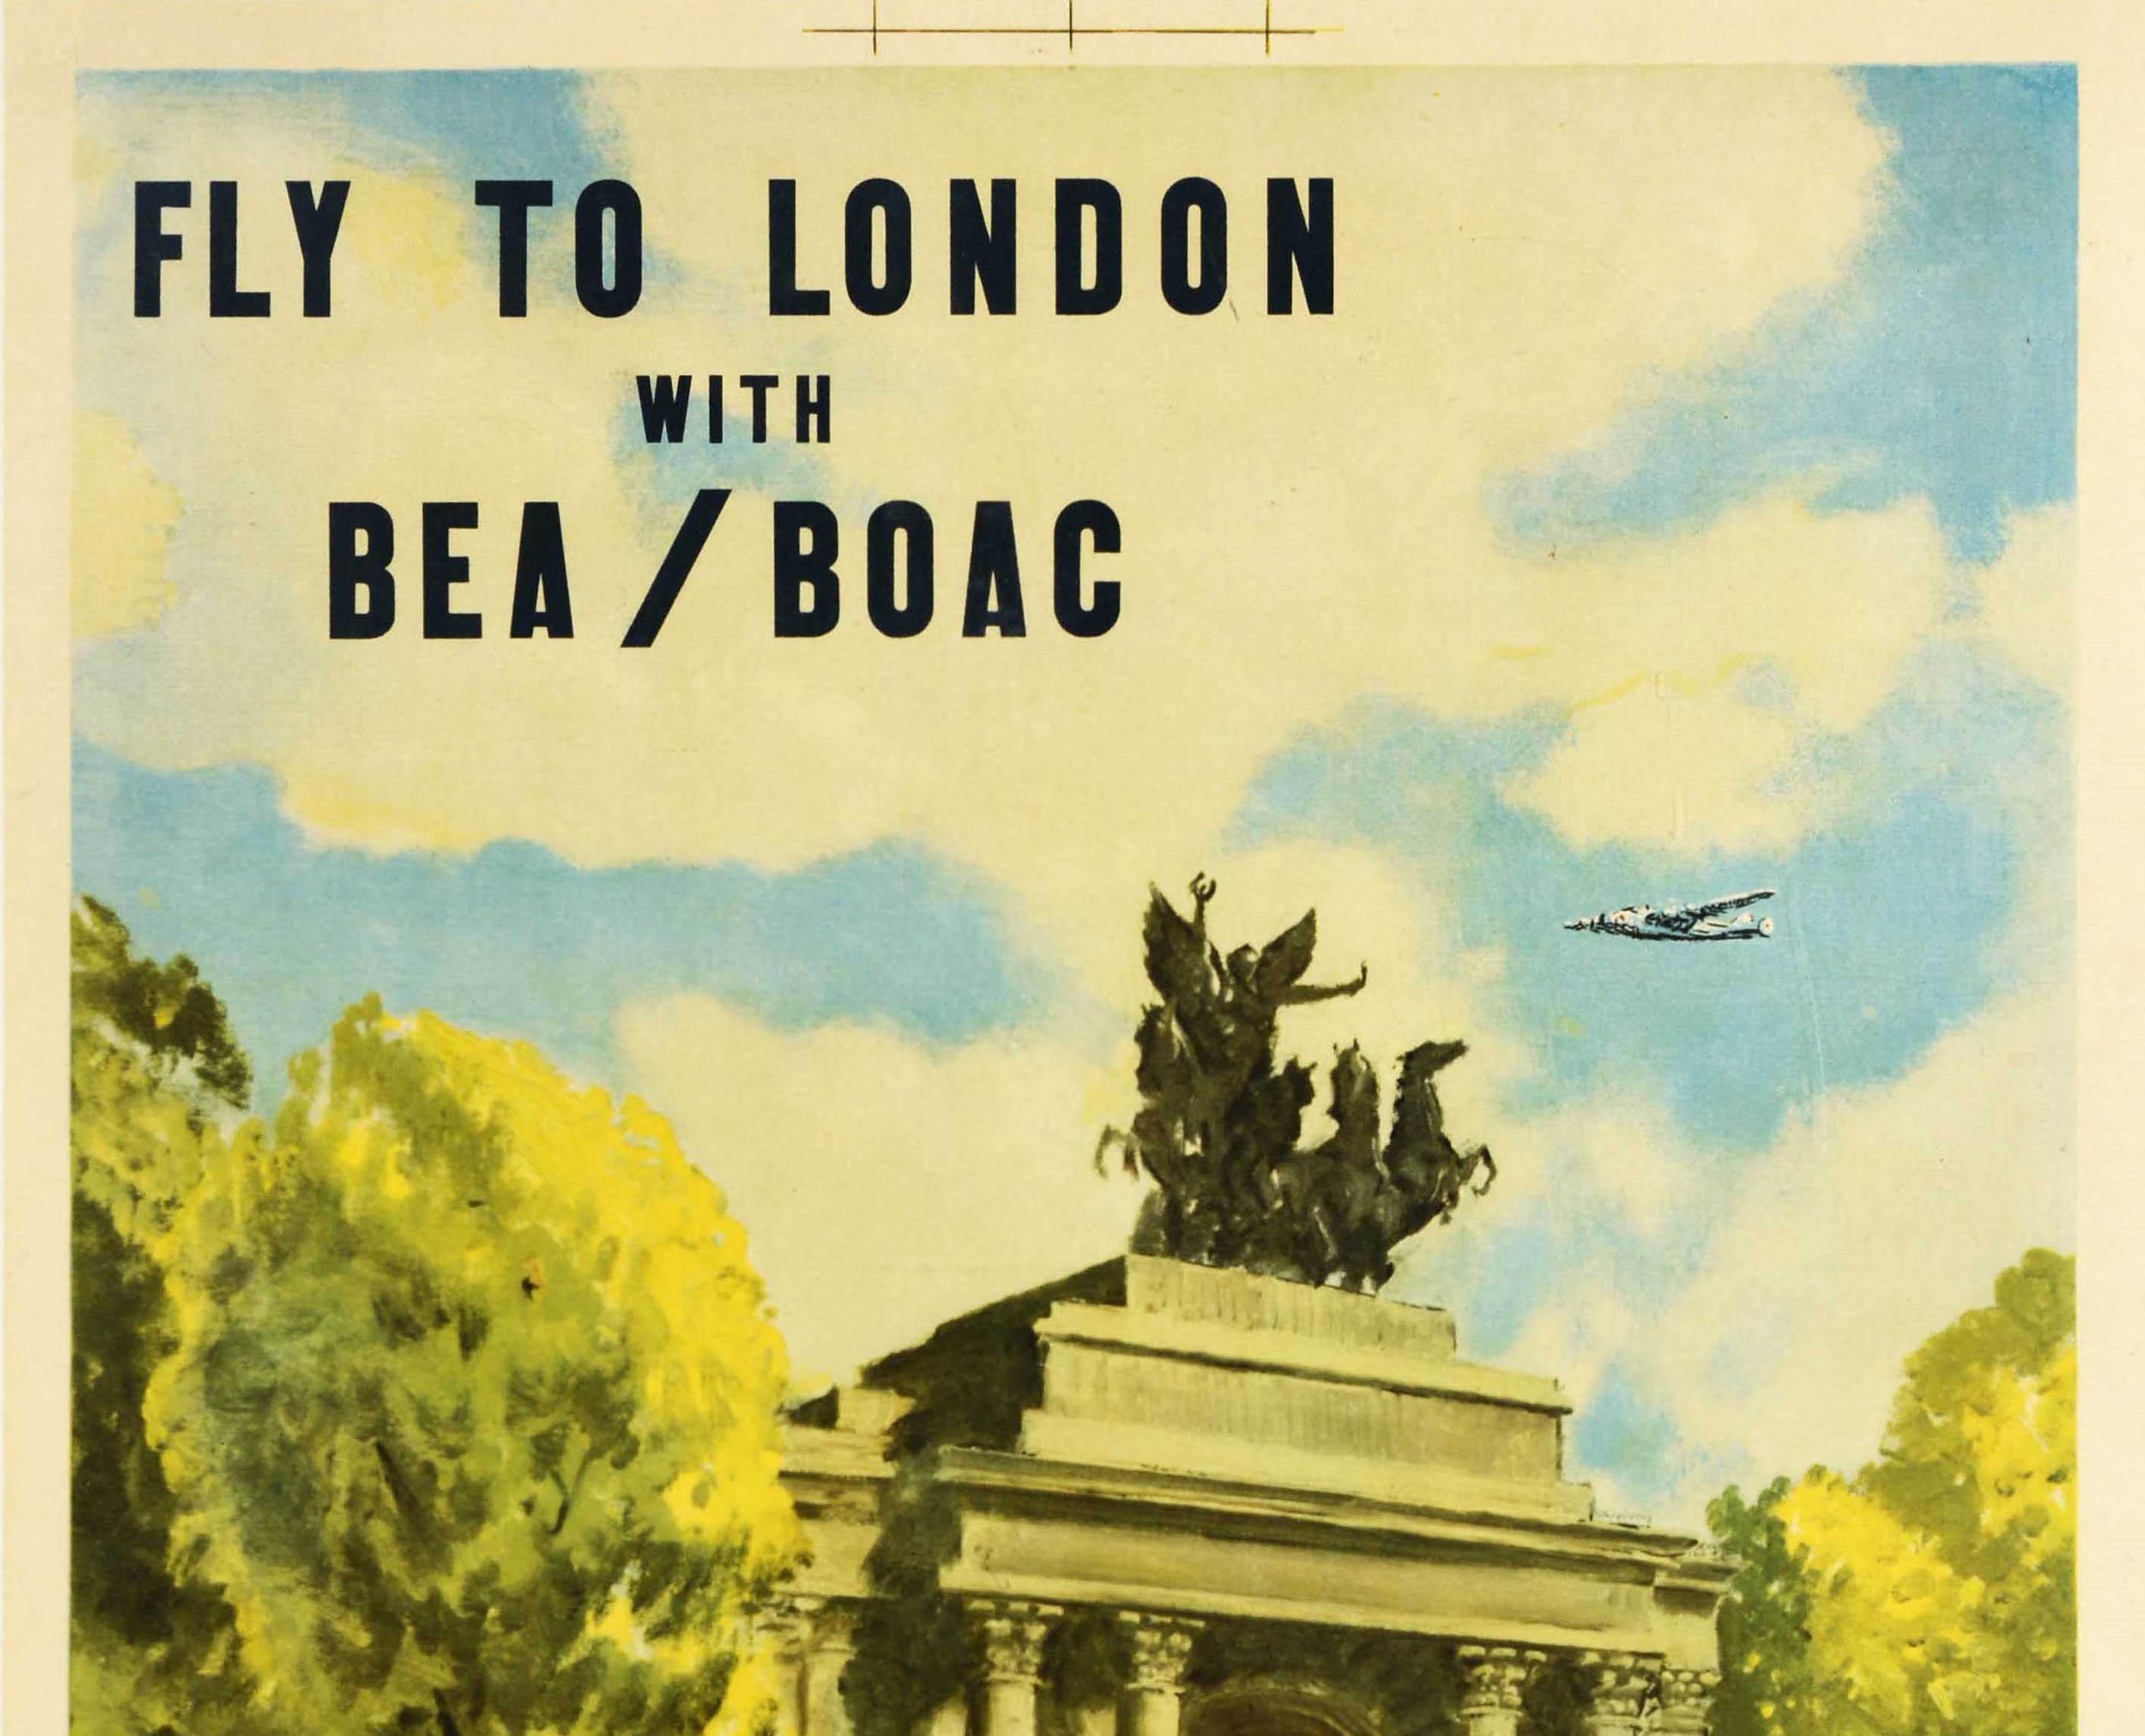 Original Vintage Travel Poster London Fly BEA BOAC Wellington Arch Horse Guards - Print by Clive Uptton